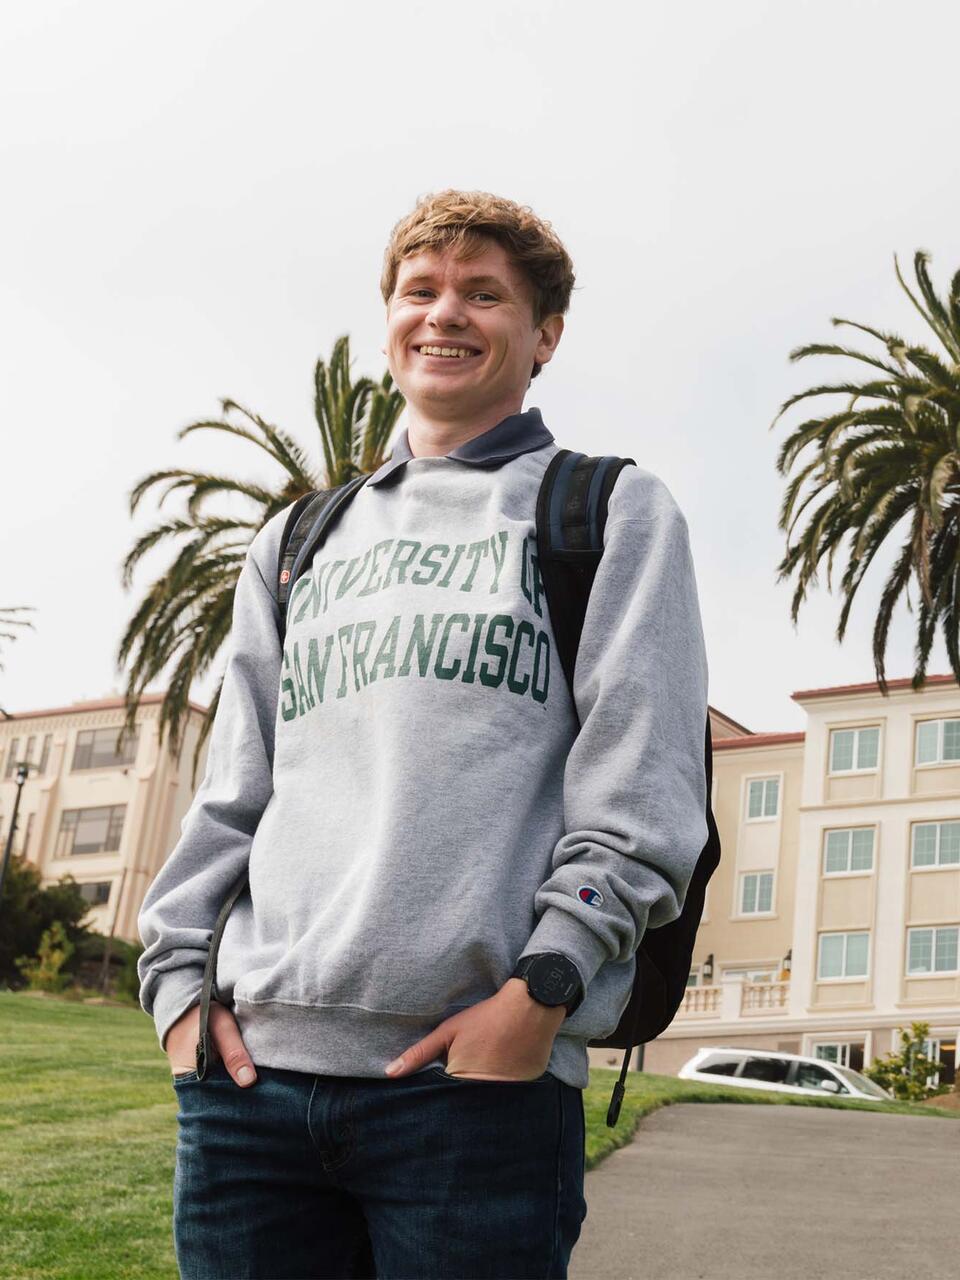 Student in USF sweatshirt stands in front of the Lone Mountain dorms.